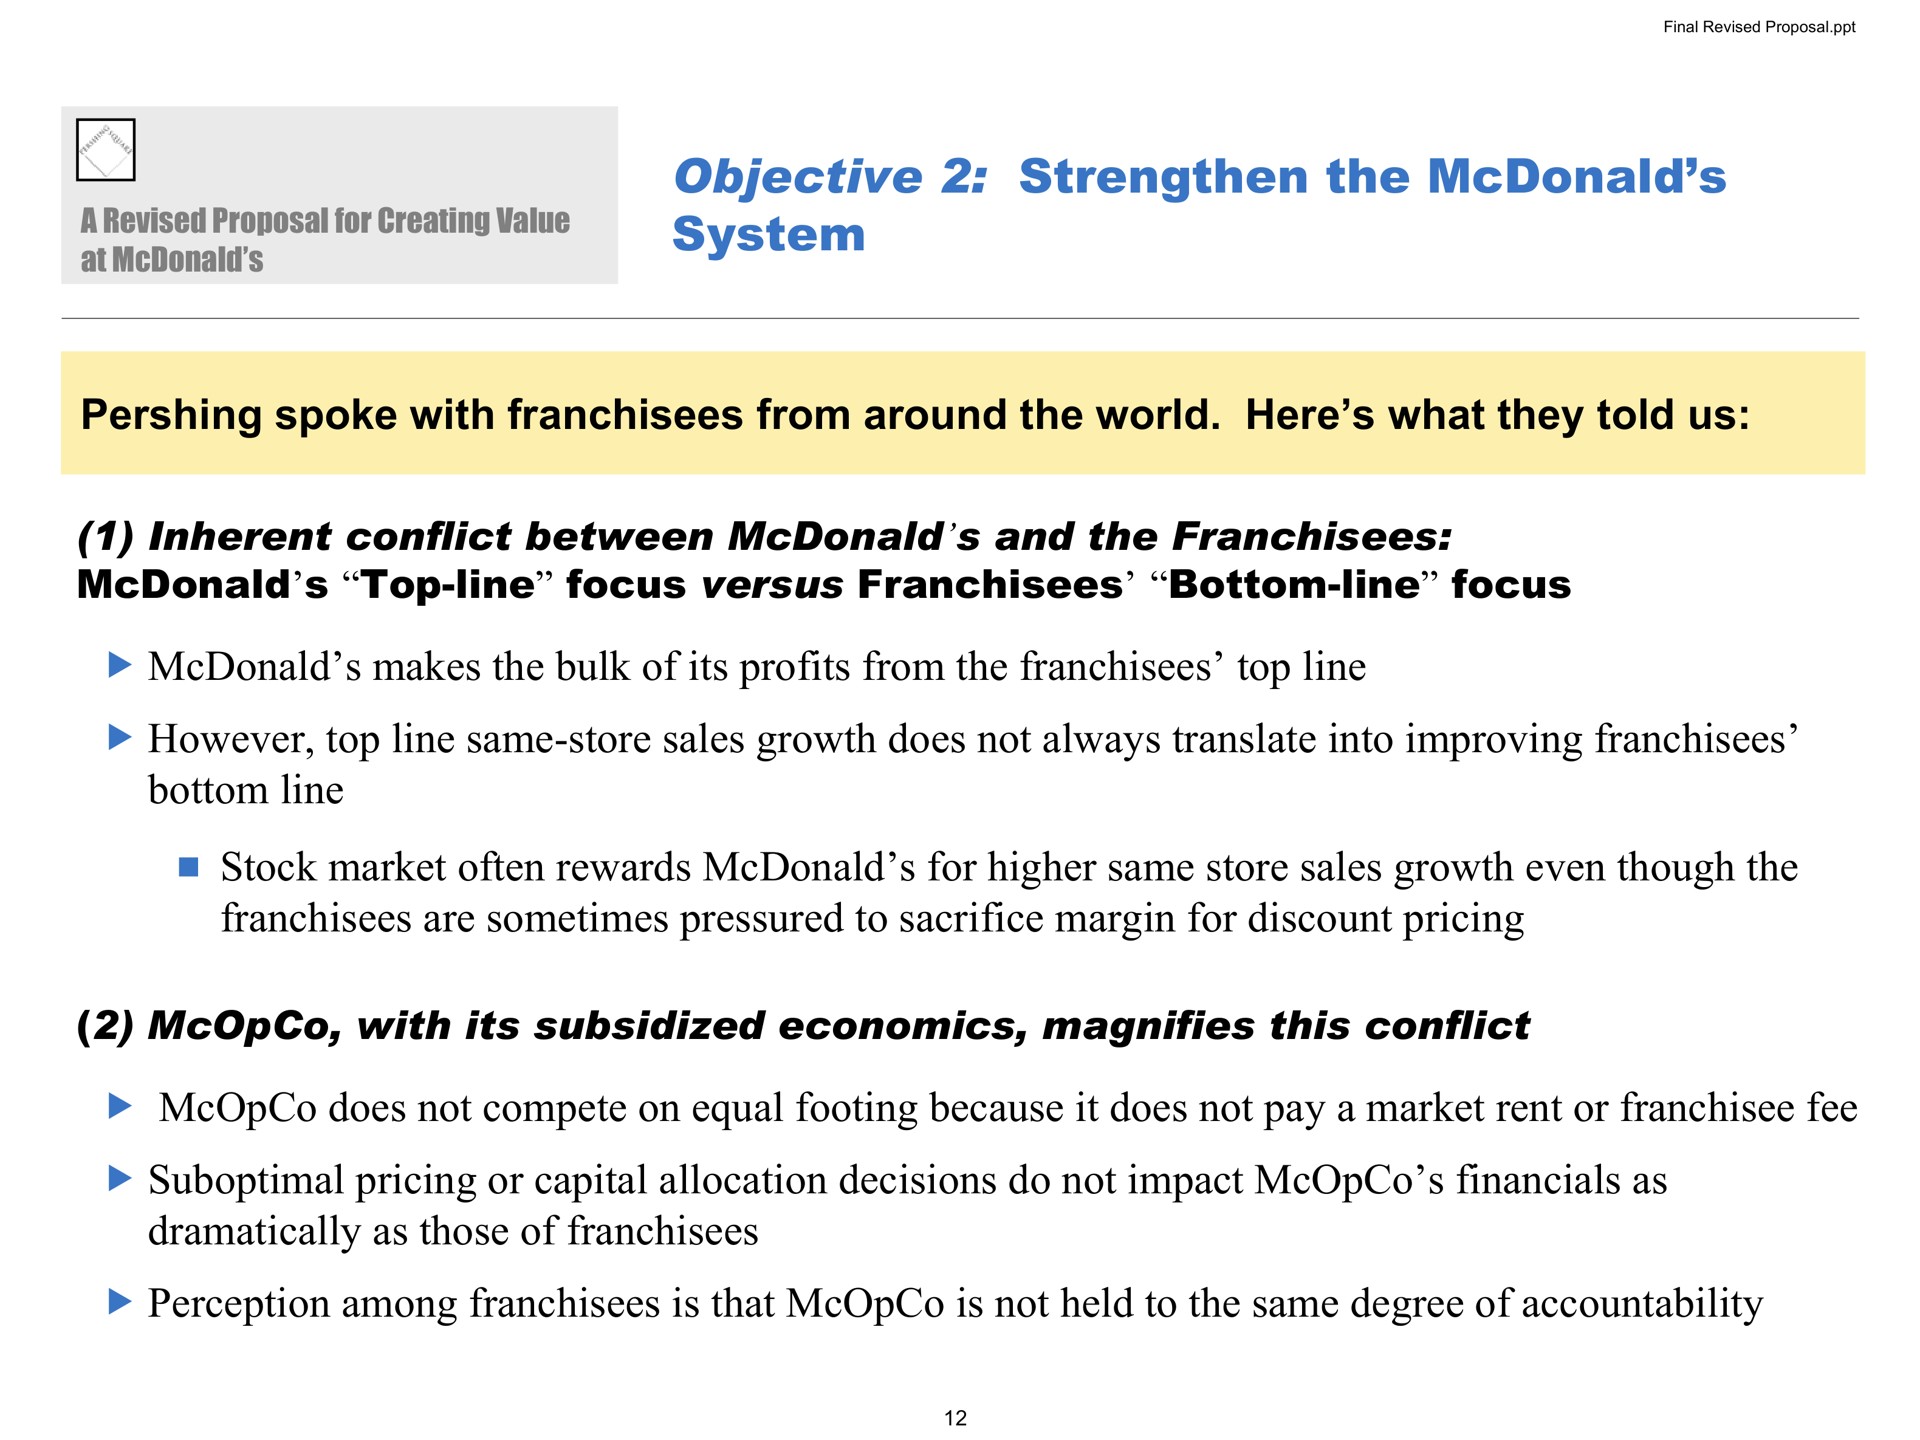 objective strengthen the system spoke with franchisees from around the world here what they told us inherent conflict between and the franchisees top line focus versus franchisees bottom line focus makes the bulk of its profits from the franchisees top line however top line same store sales growth does not always translate into improving franchisees bottom line stock market often rewards for higher same store sales growth even though the franchisees are sometimes pressured to sacrifice margin for discount pricing with its subsidized economics magnifies this conflict does not compete on equal footing because it does not pay a market rent or fee suboptimal pricing or capital allocation decisions do not impact as dramatically as those of franchisees perception among franchisees is that is not held to the same degree of accountability | Pershing Square